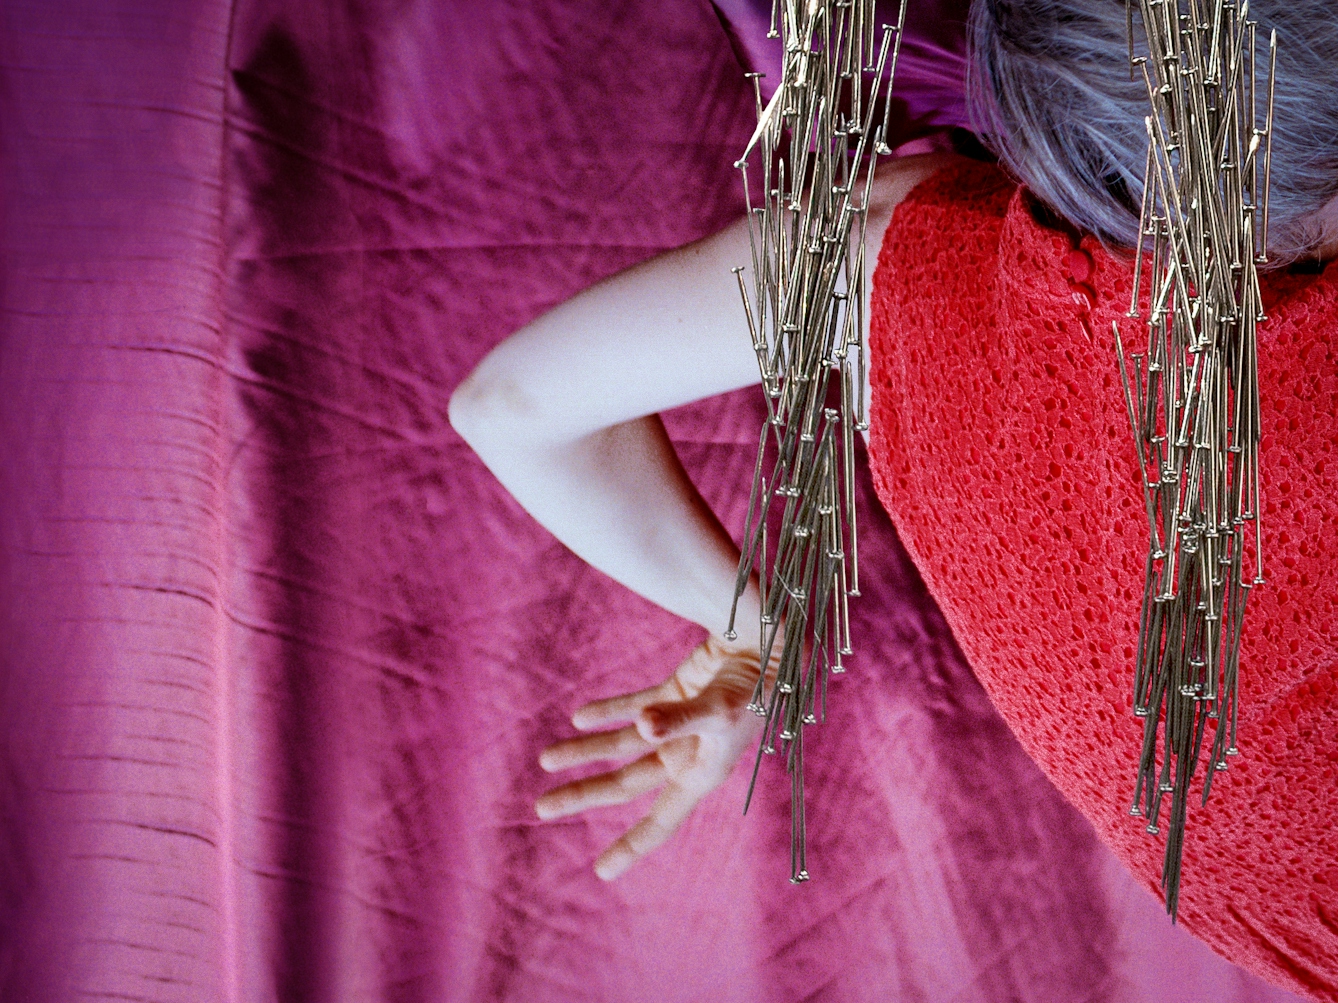 Detail from a larger artwork created with a colour photographic print of a female figure in a bright red dress, set against a purple and blue draped silk background. The detail shows the woman's bent arm and two of the pillars made out of dress pins.